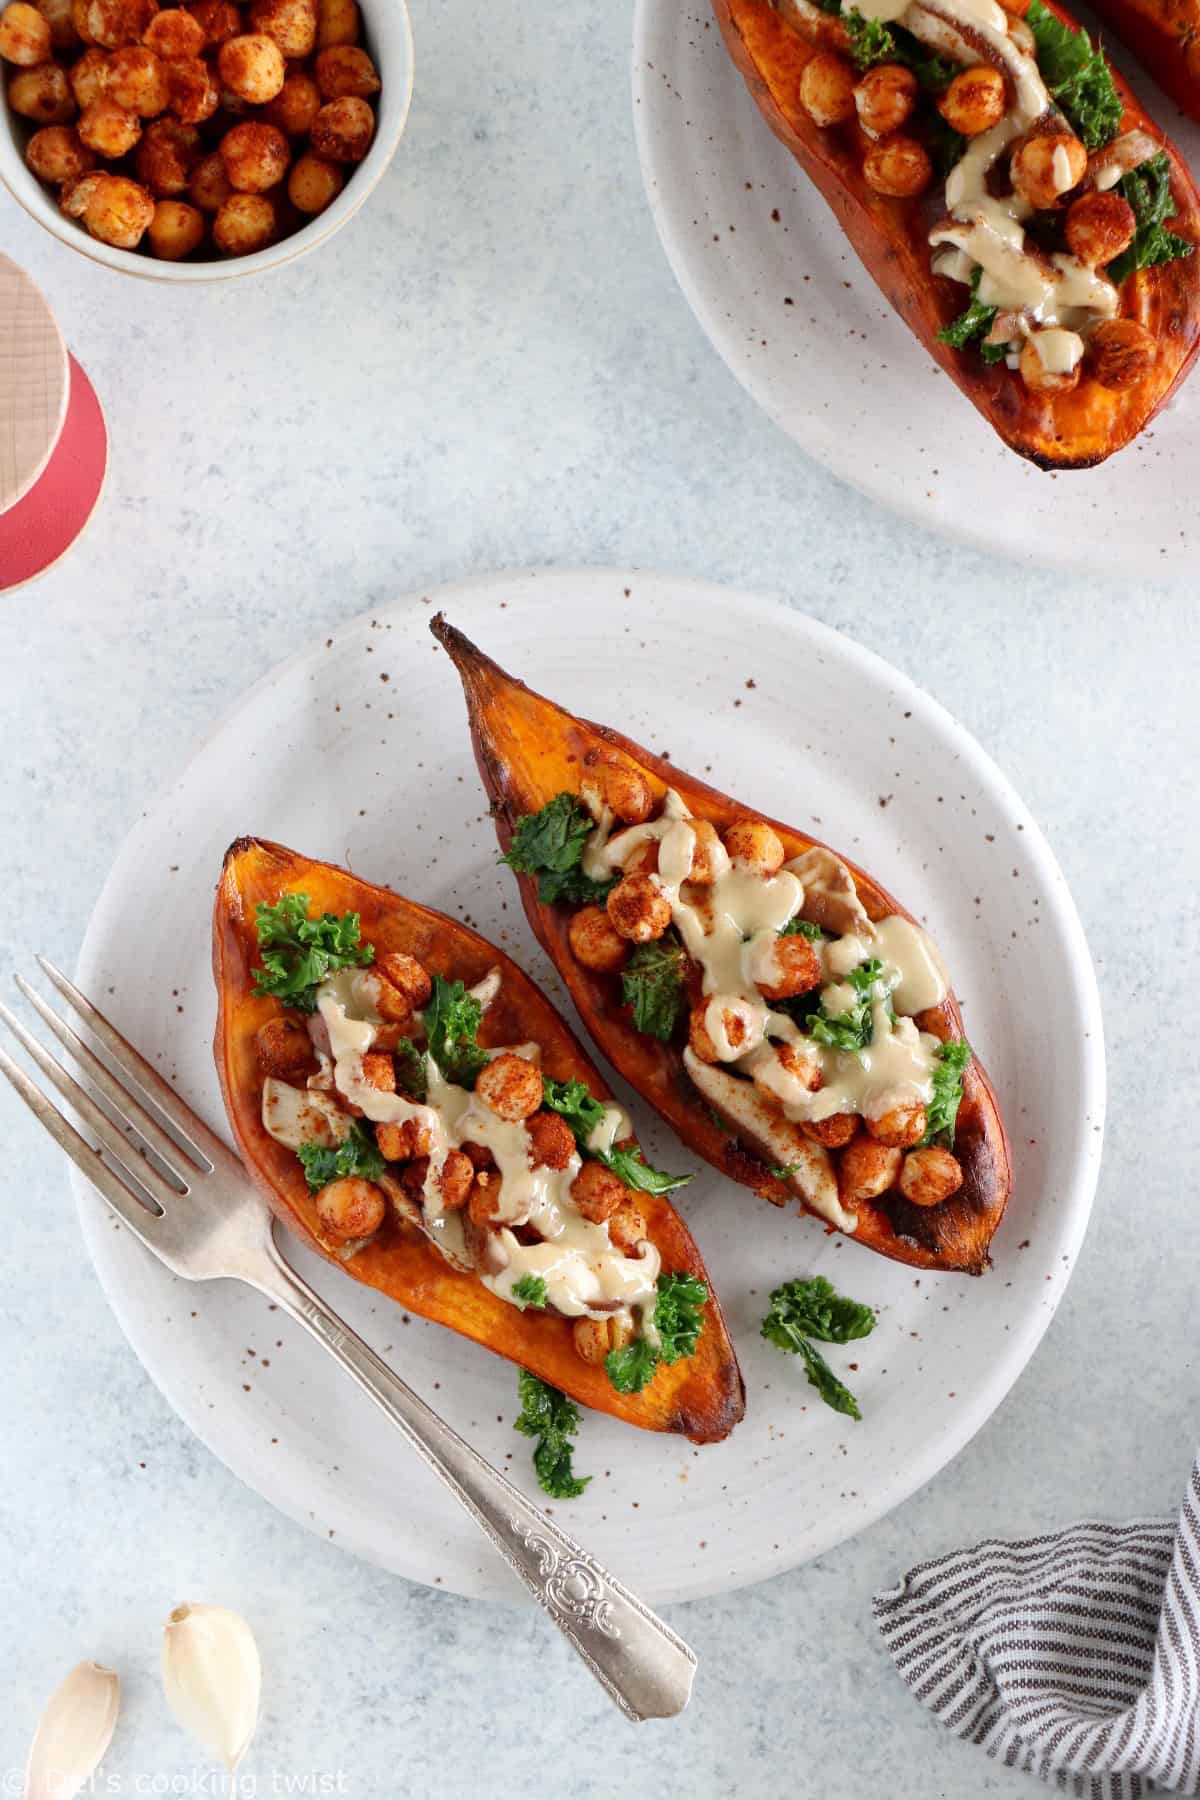 Fall harvest chickpea stuffed sweet potatoes are loaded with nutritious plant-based ingredients and make a delicious healthy, wholesome weeknight dinner.